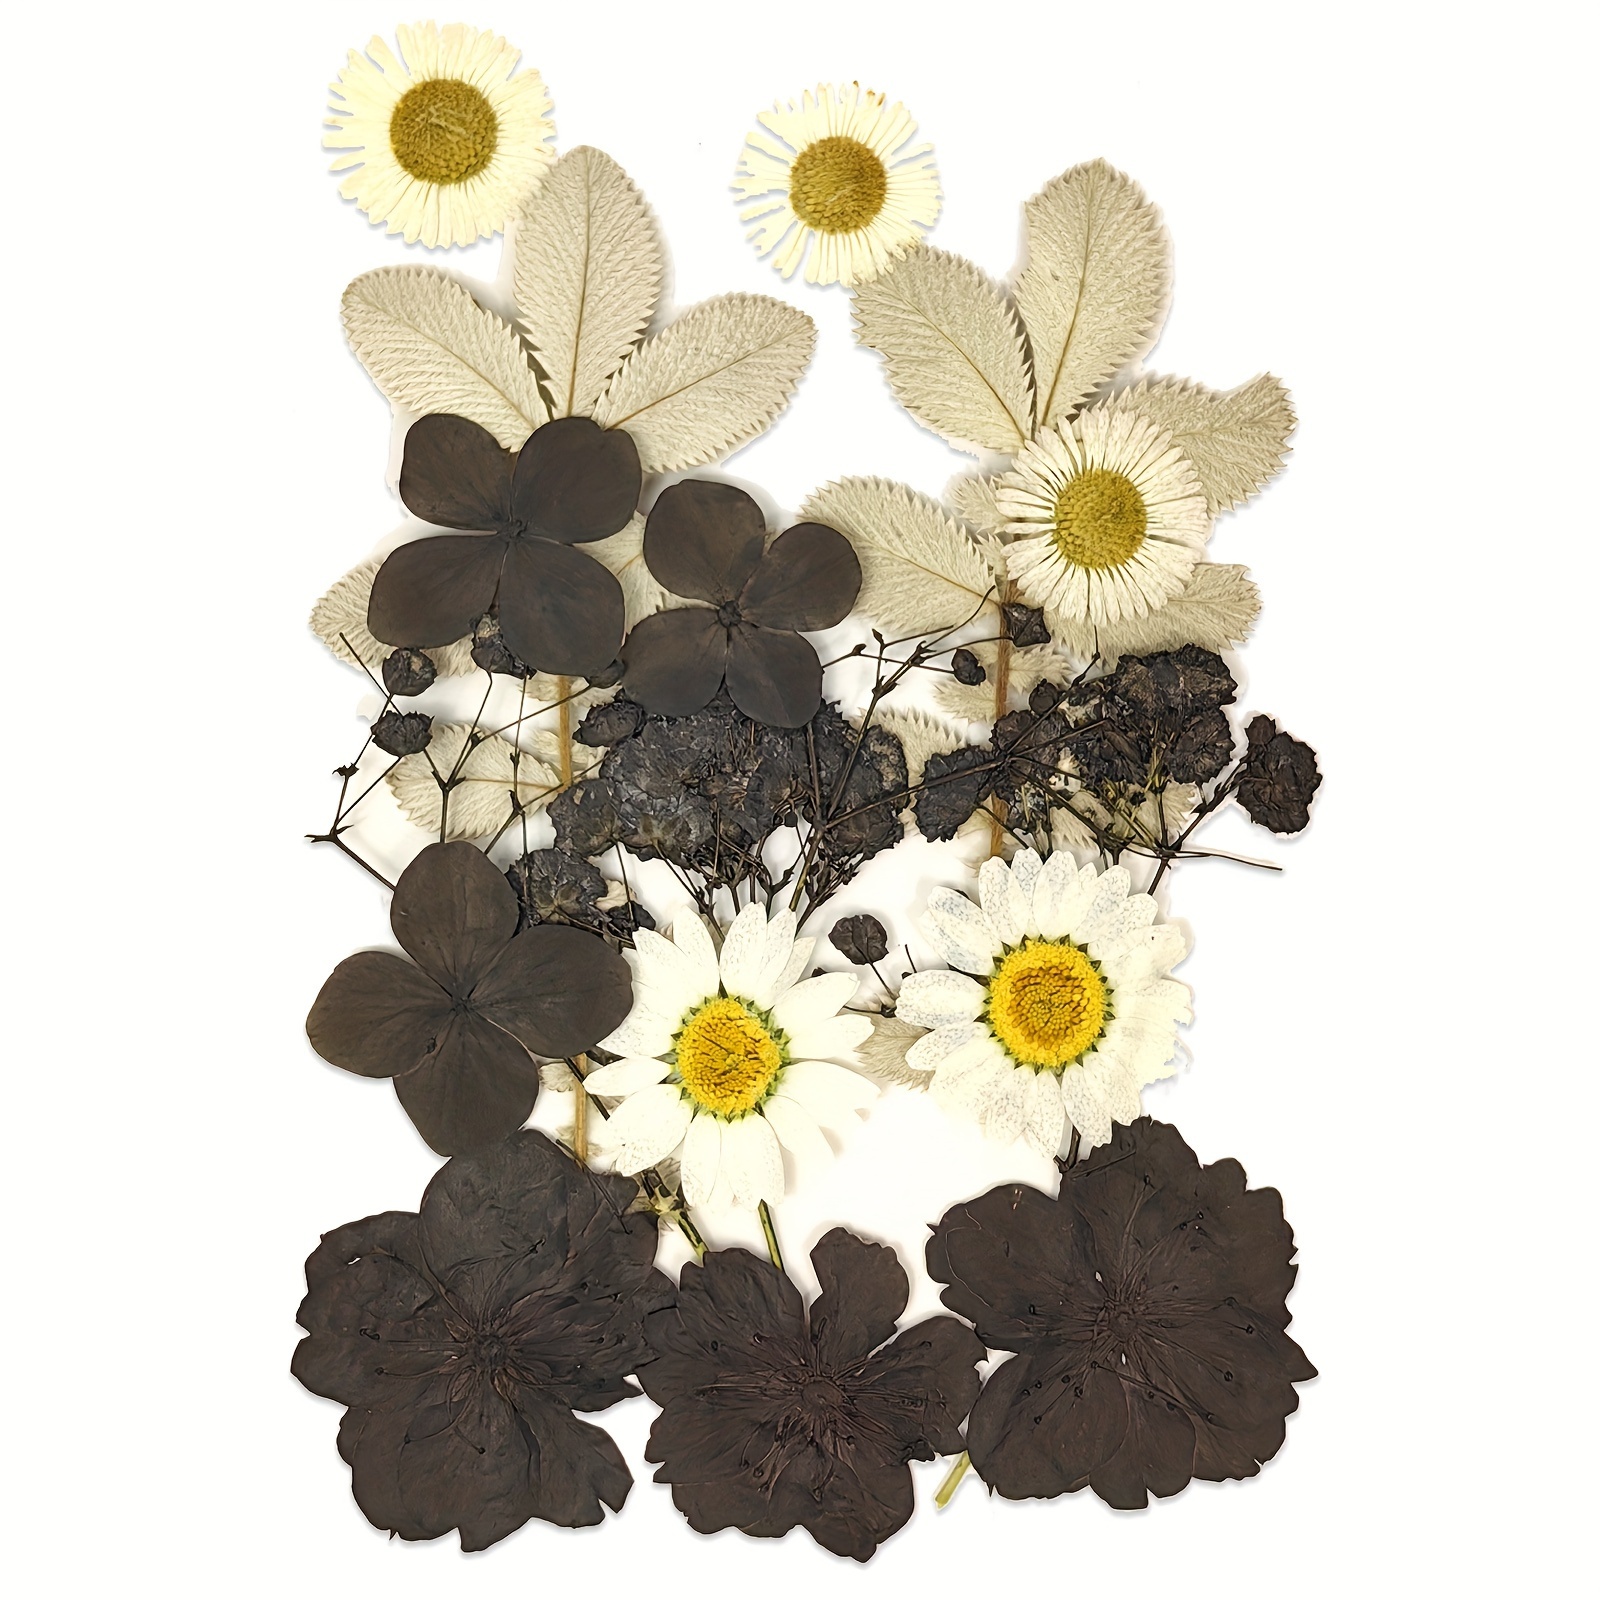 White Dried Flowers Dried Pressed Flowers Leaves Natural Pressed Flowers  White Pressed Flowers For Resin Jewelry Scrapbooking Art Floral Decorations, Shop The Latest Trends